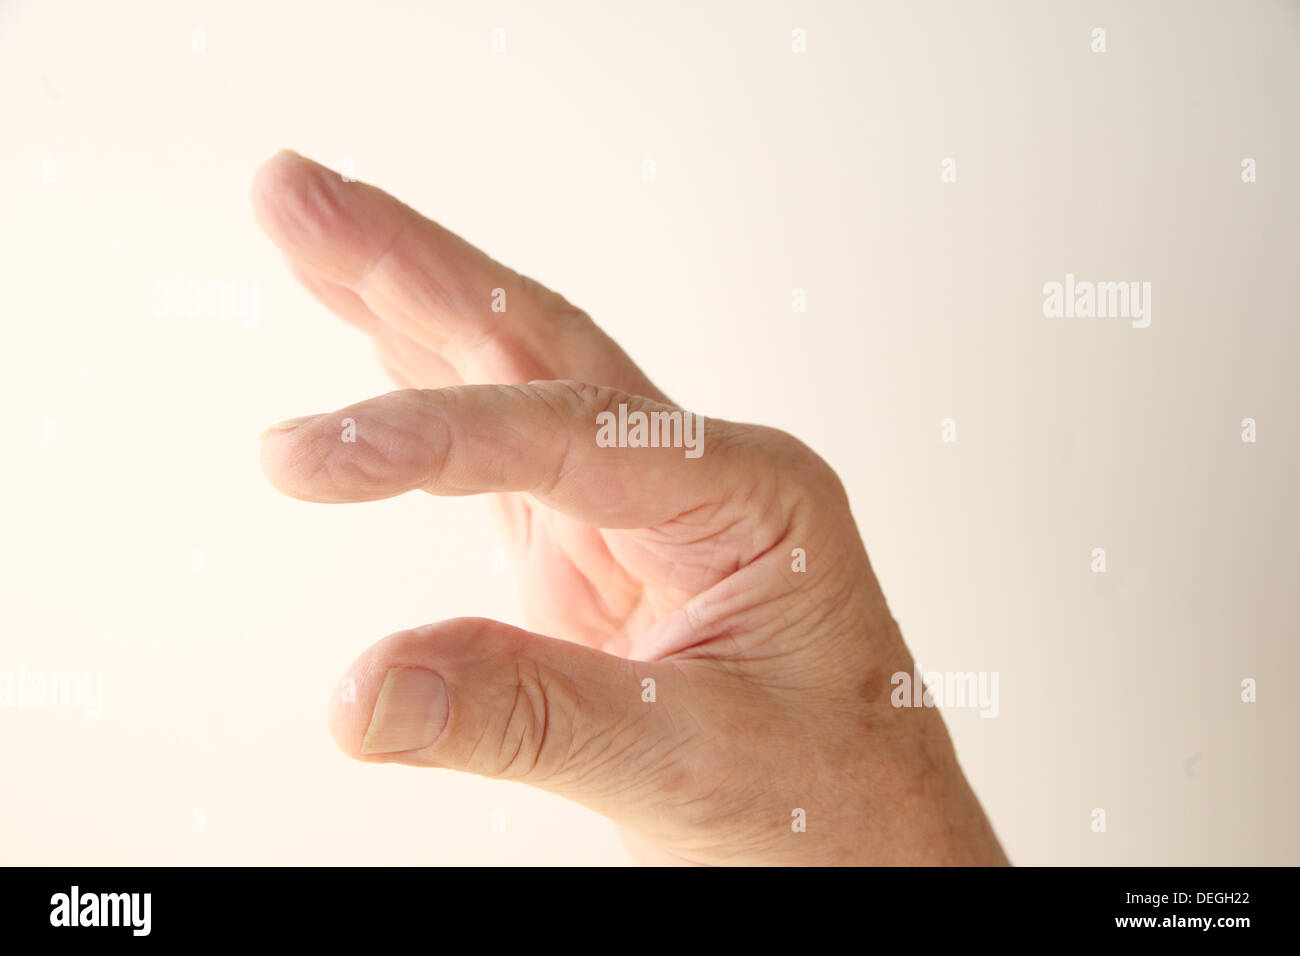 a man's hand indicating smallness or largeness Stock Photo